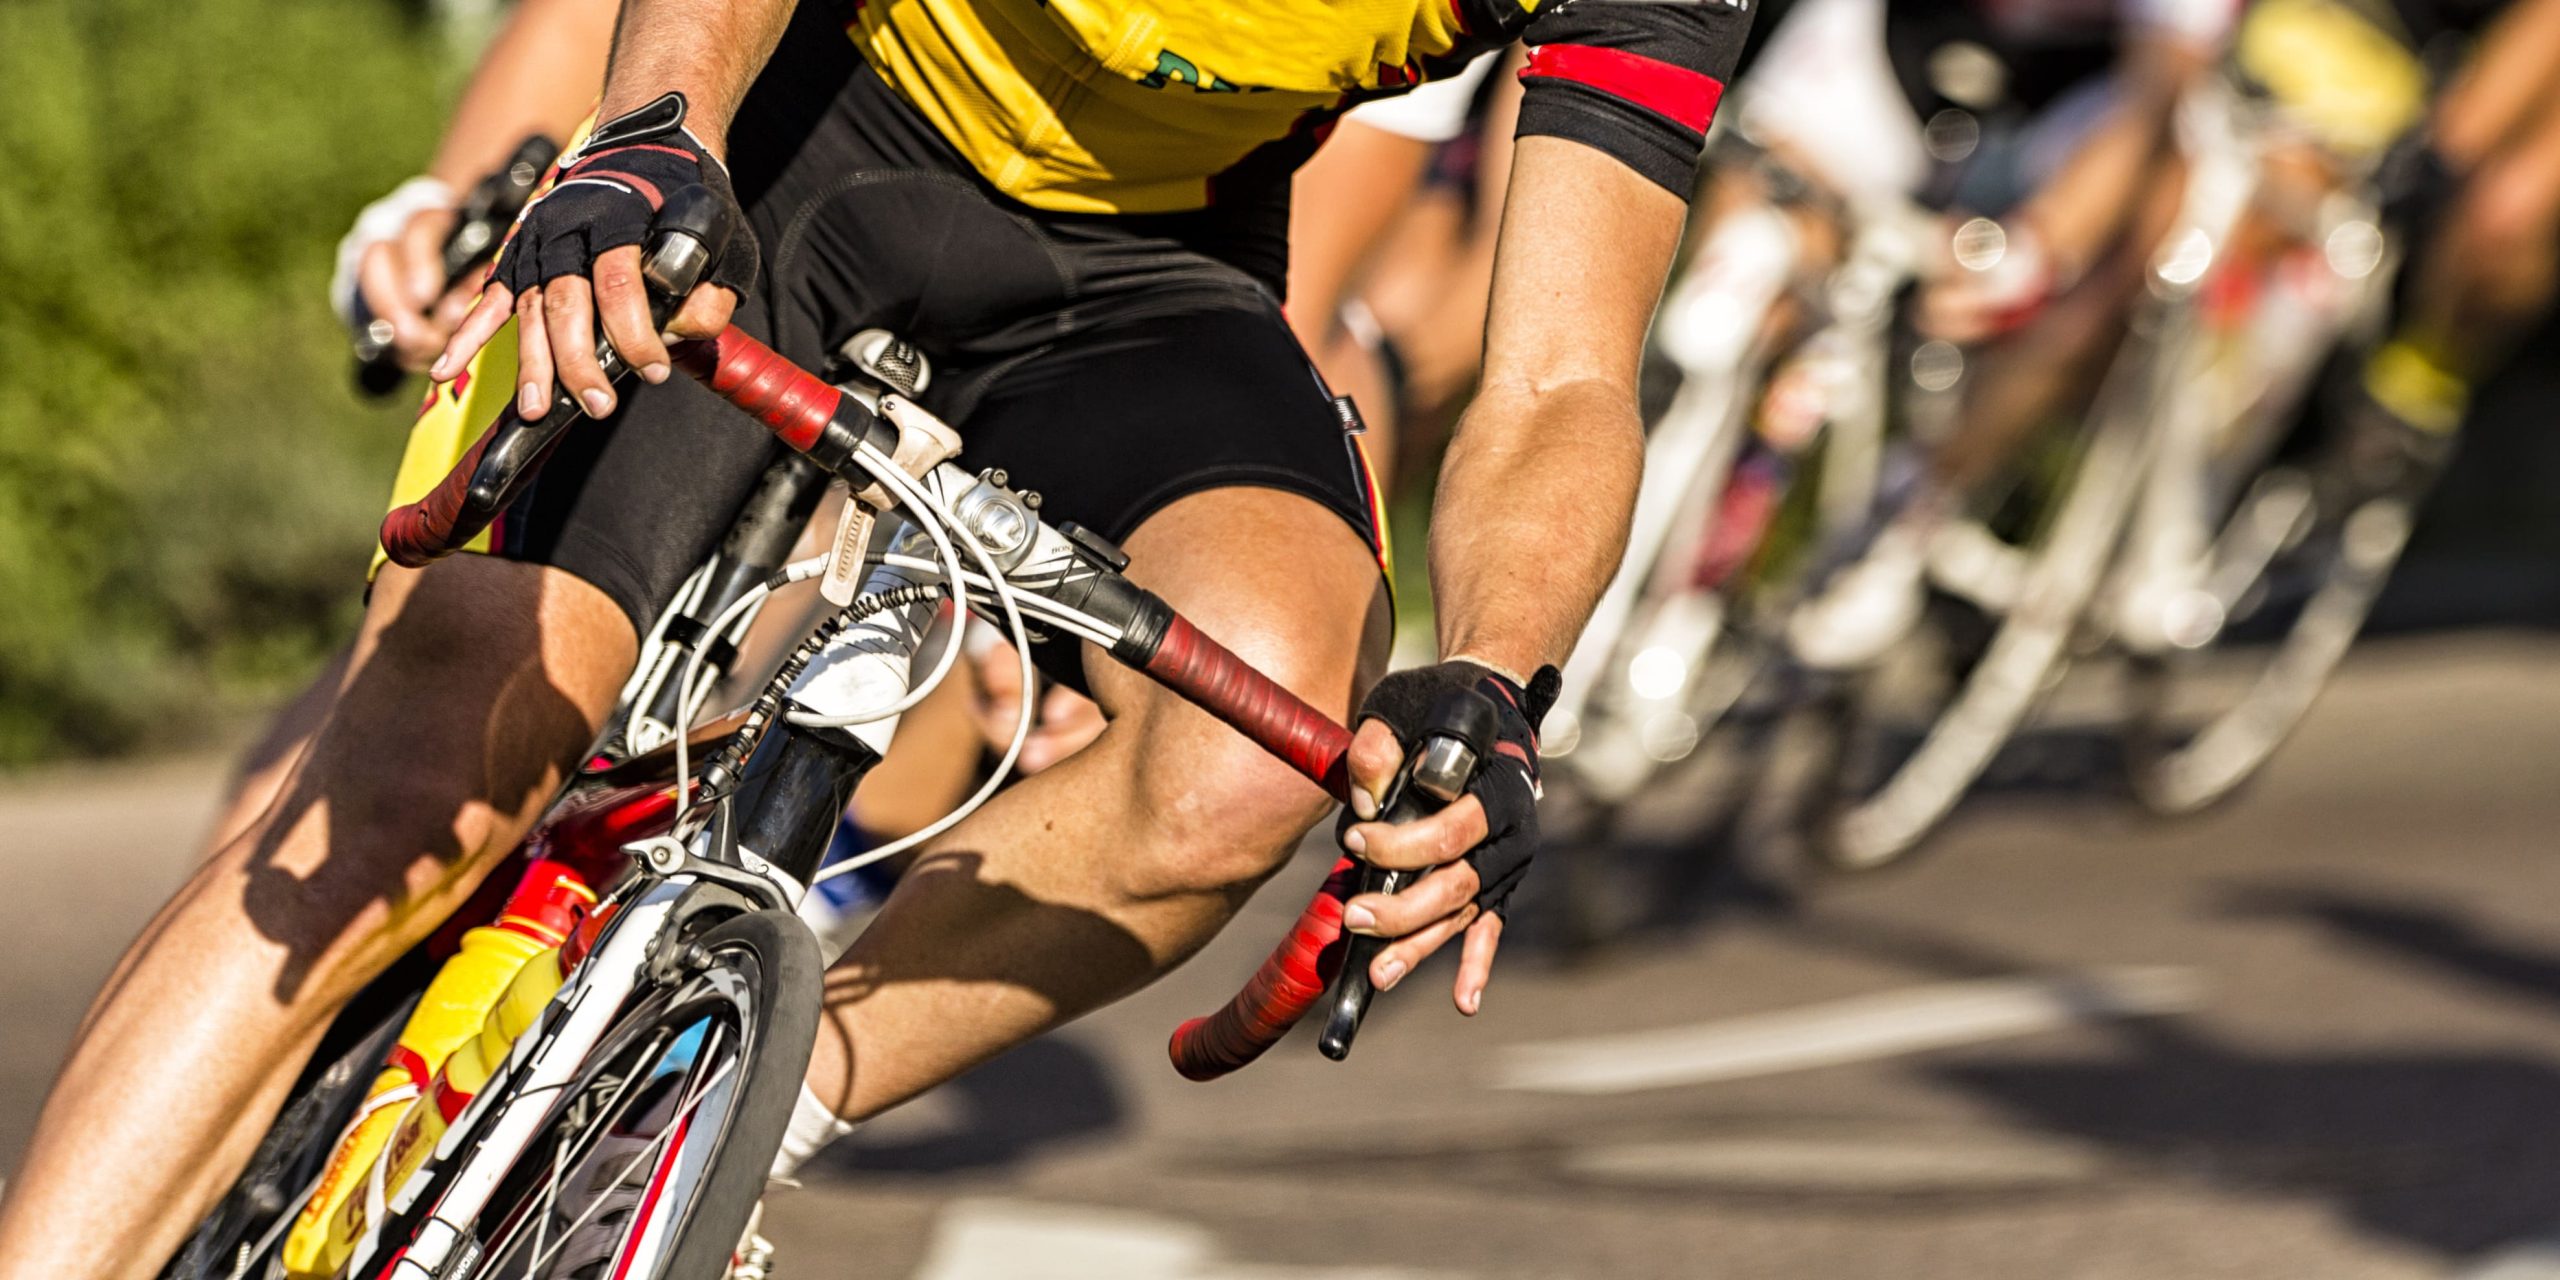 Top 5 Cycling Races and Events in the United States